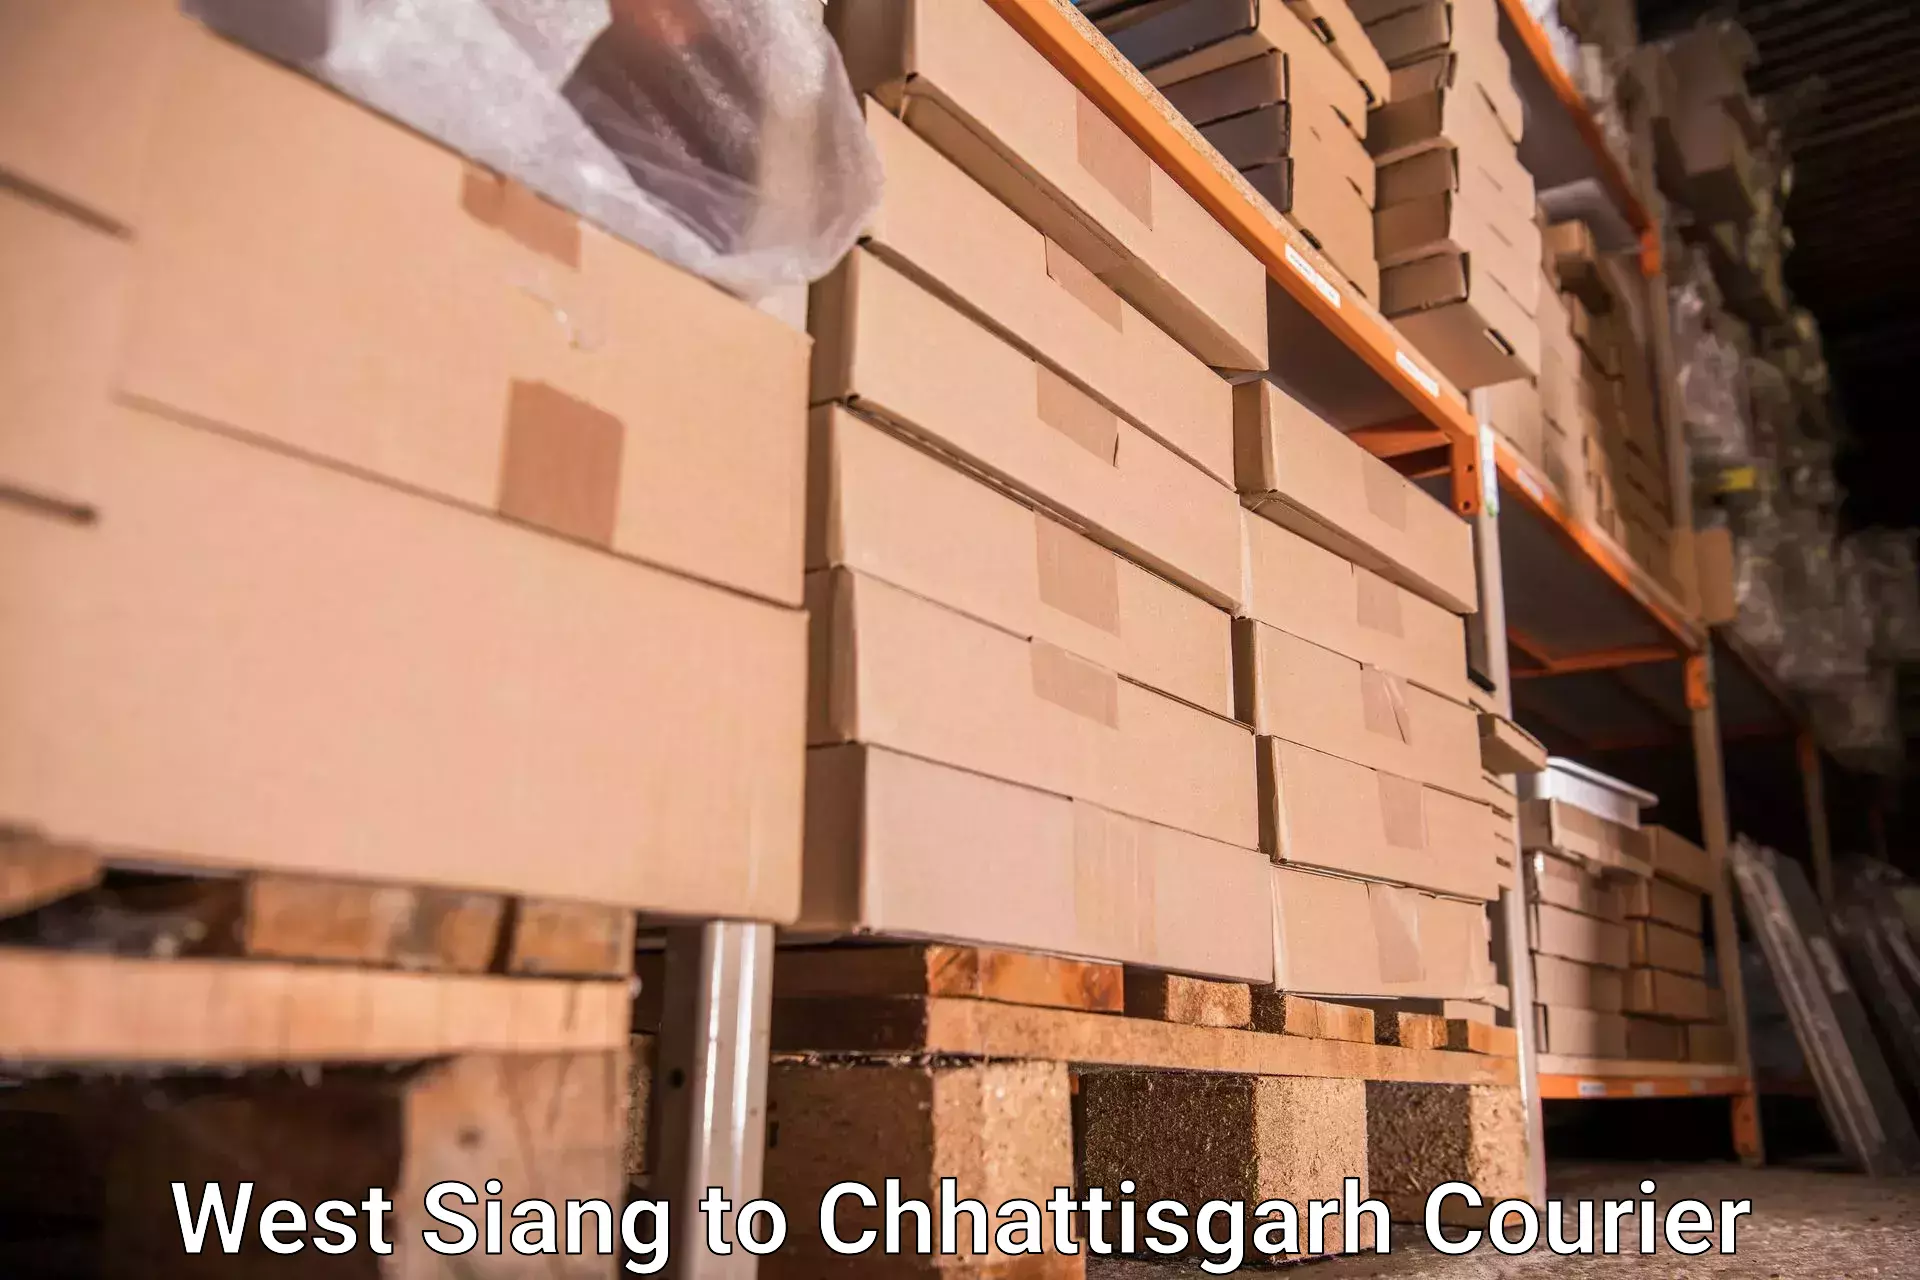 Emergency baggage service West Siang to Patna Chhattisgarh